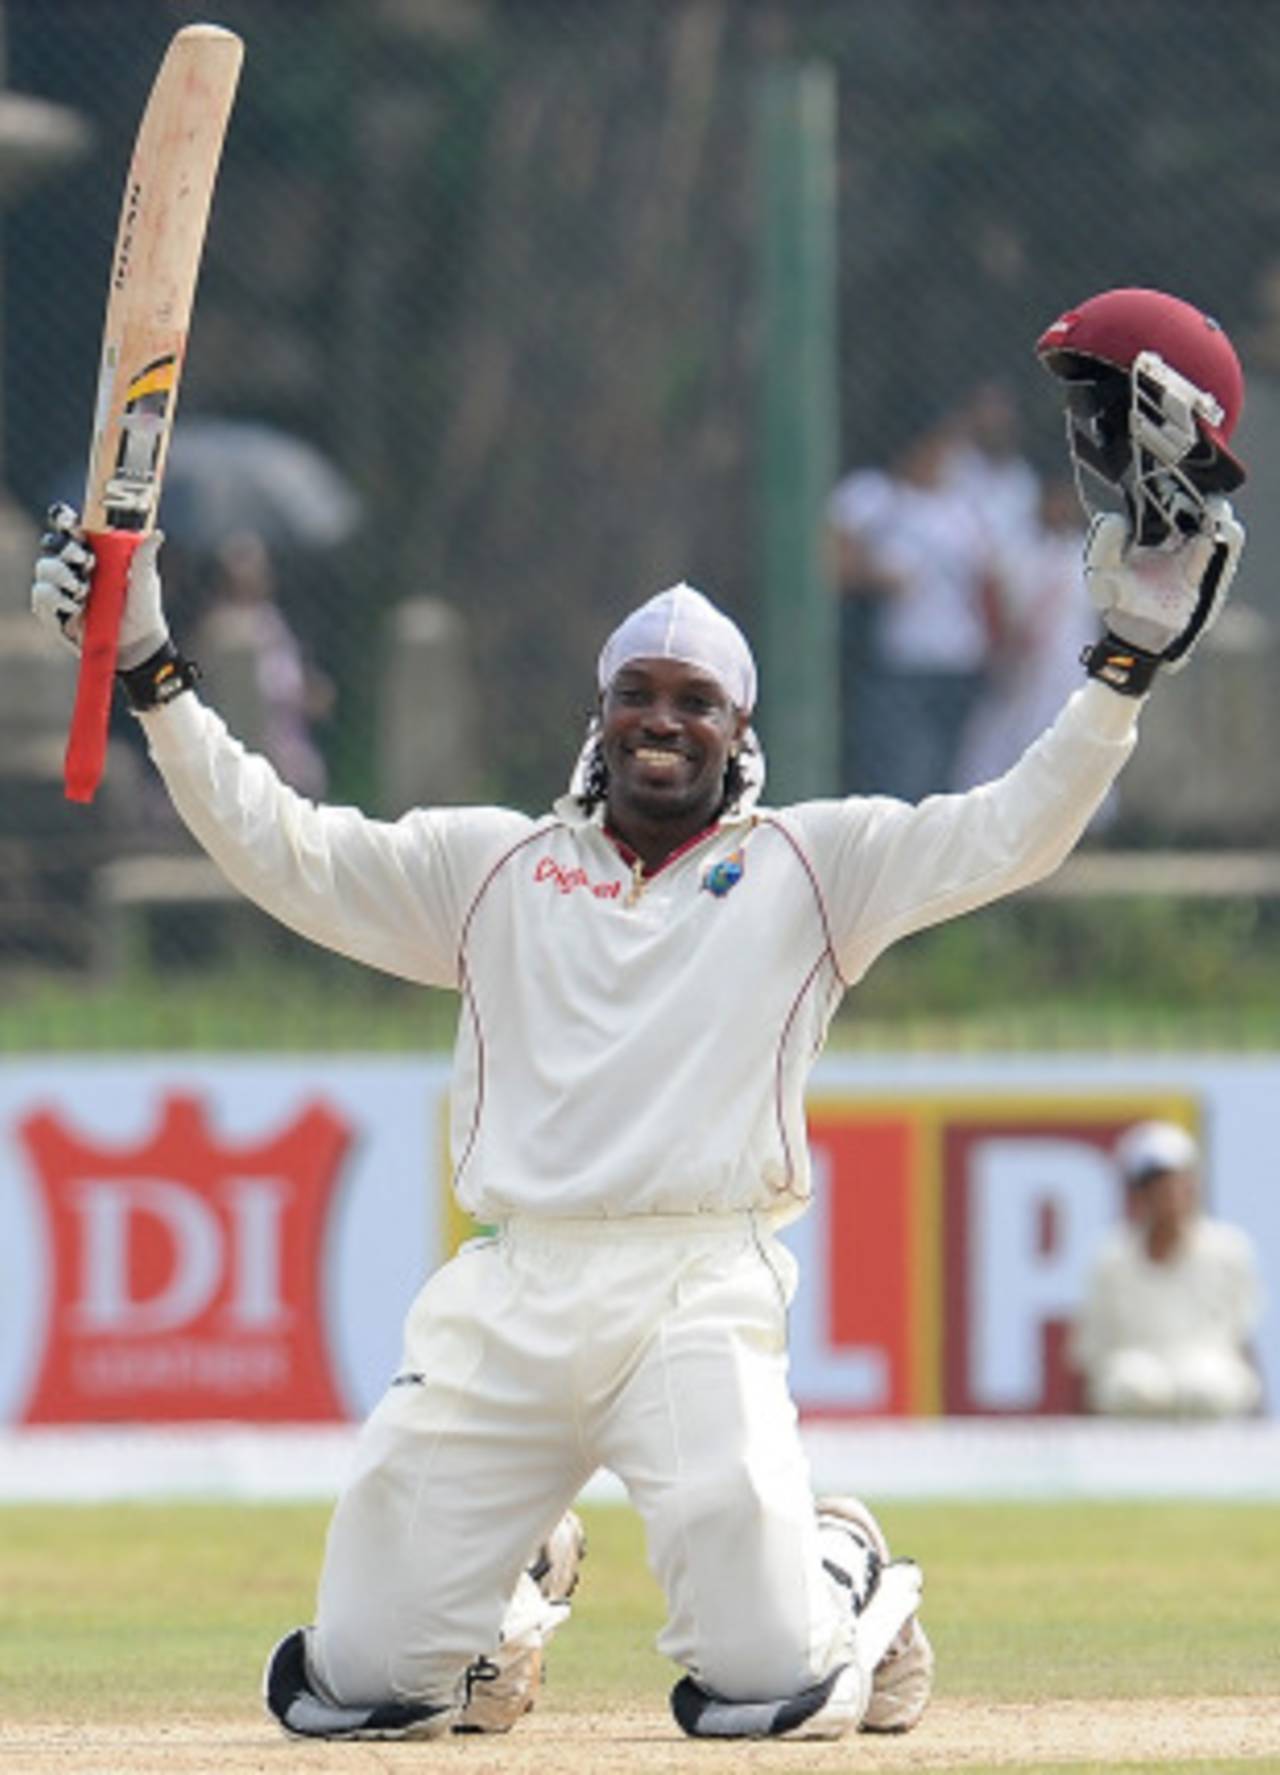 Chris Gayle celebrates after reaching his triple-century, Sri Lanka v West Indies, 1st Test, Galle, 2nd day, November 16, 2010